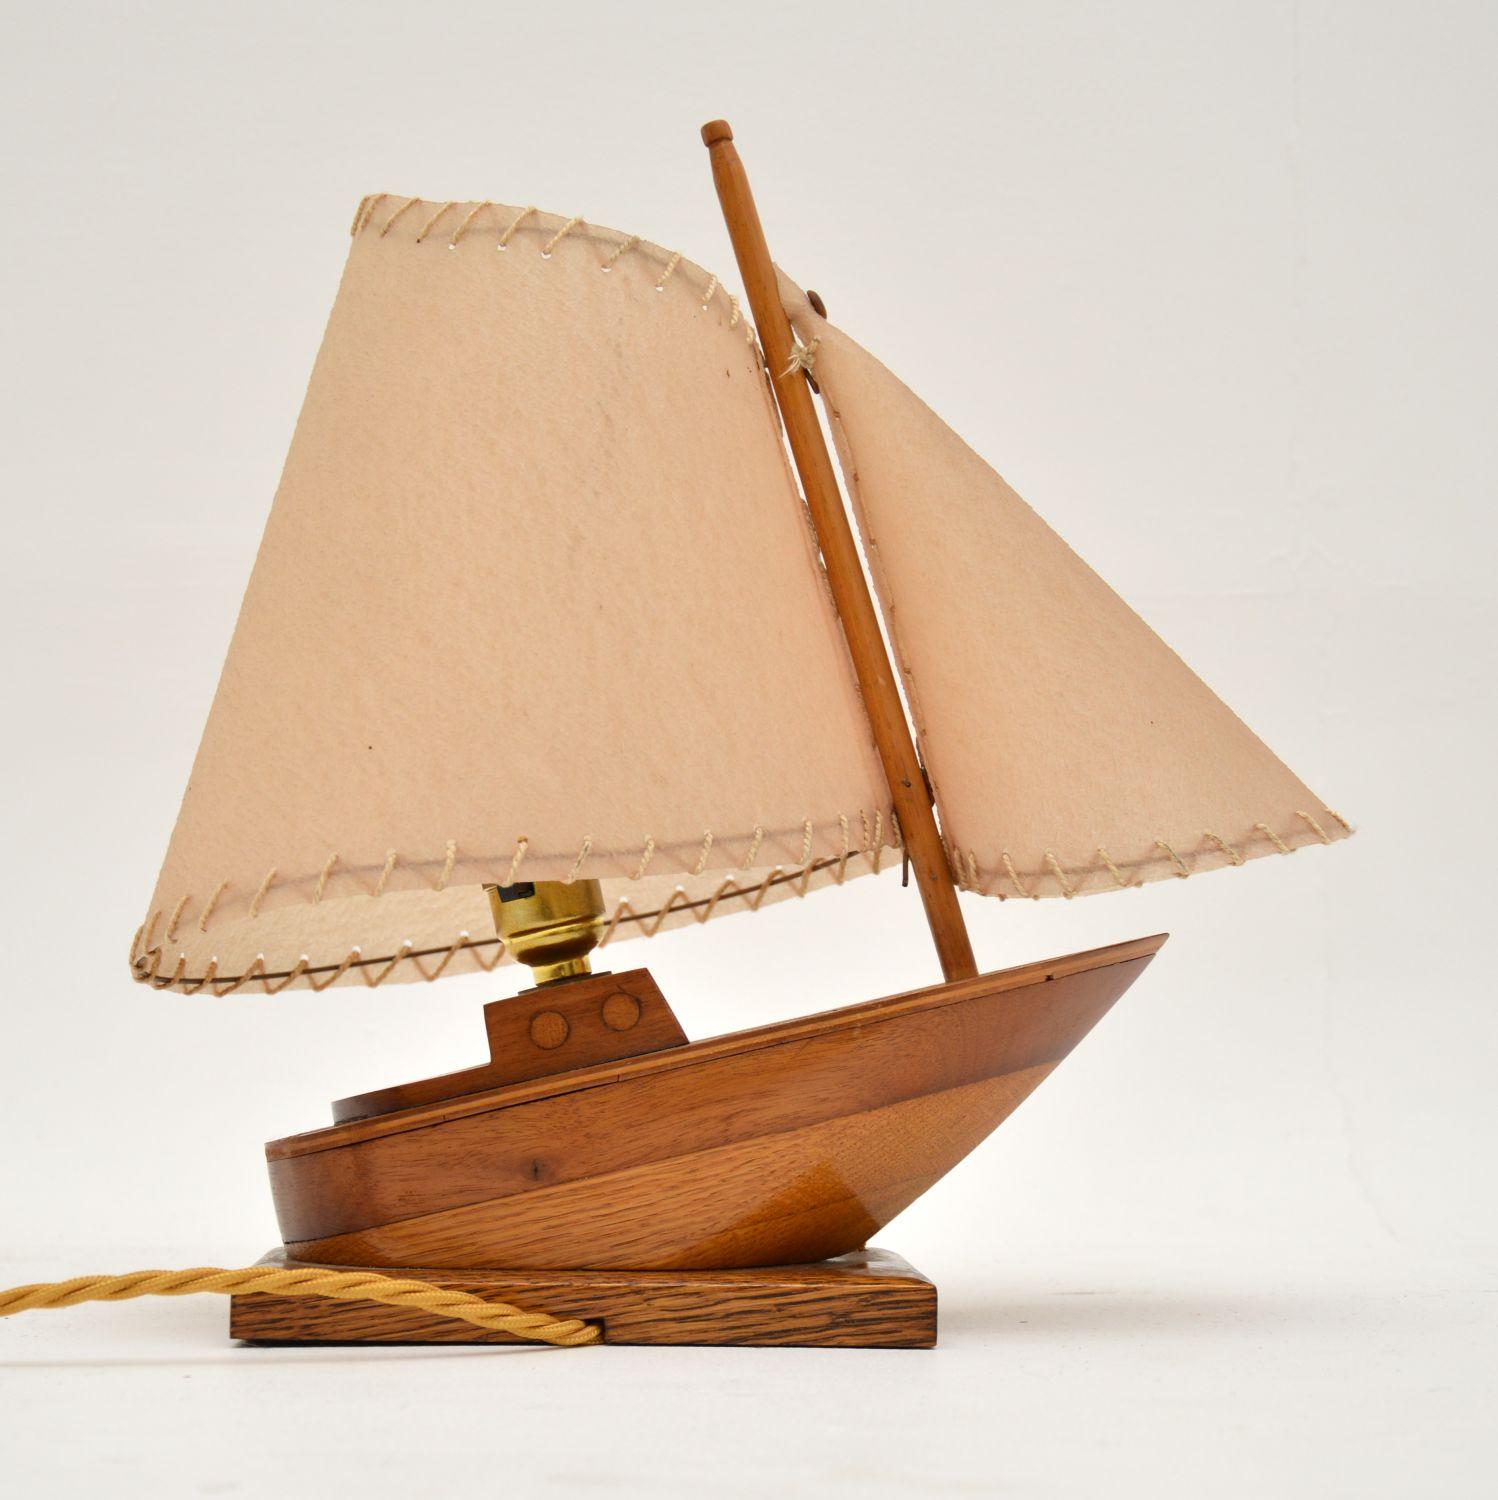 A beautiful and unusual table lamp, crafted in the shape of a sail boat. This dates from the 1960’s.

It is of lovely quality, the boat is really well made from solid oak and mahogany. The shade is shaped like the sail, and is also beautifully